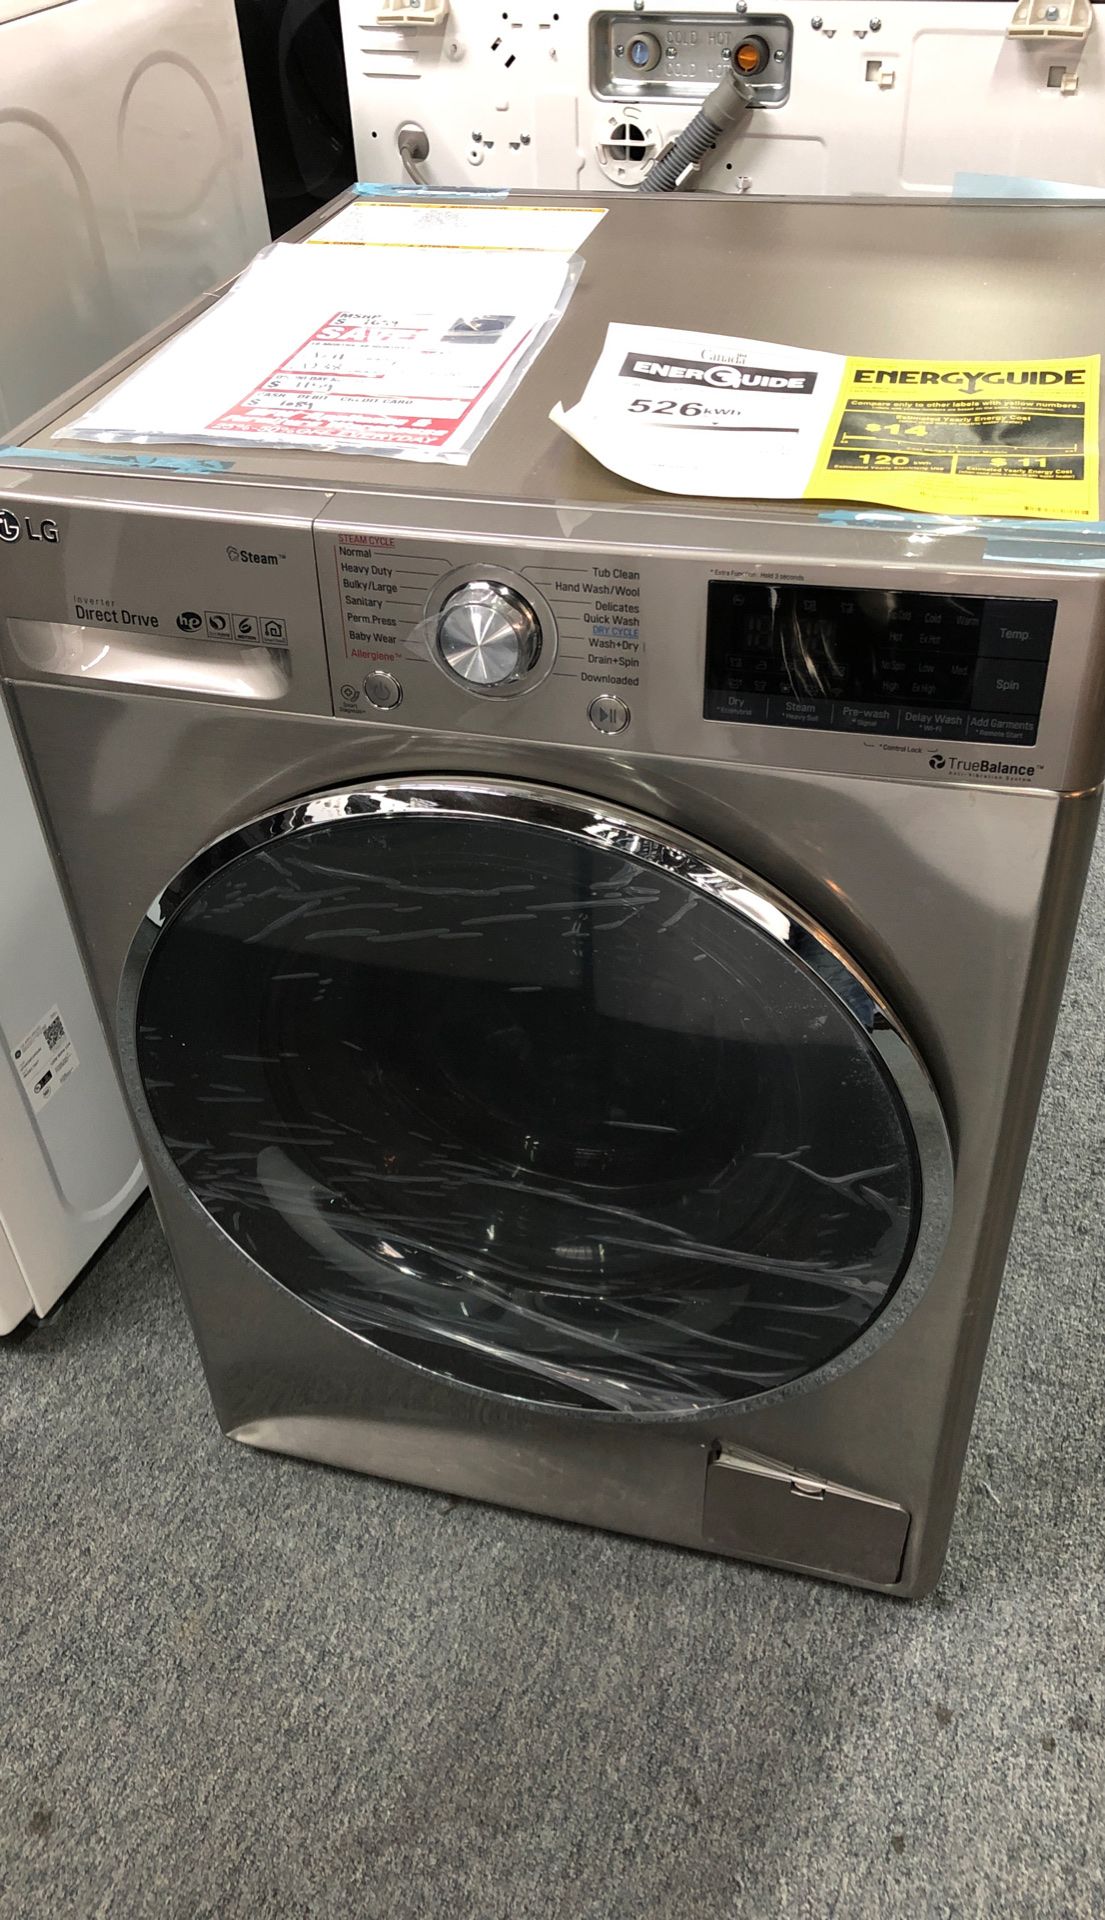 Washer dryer combo all in one machine original price $1699 our price on the $999